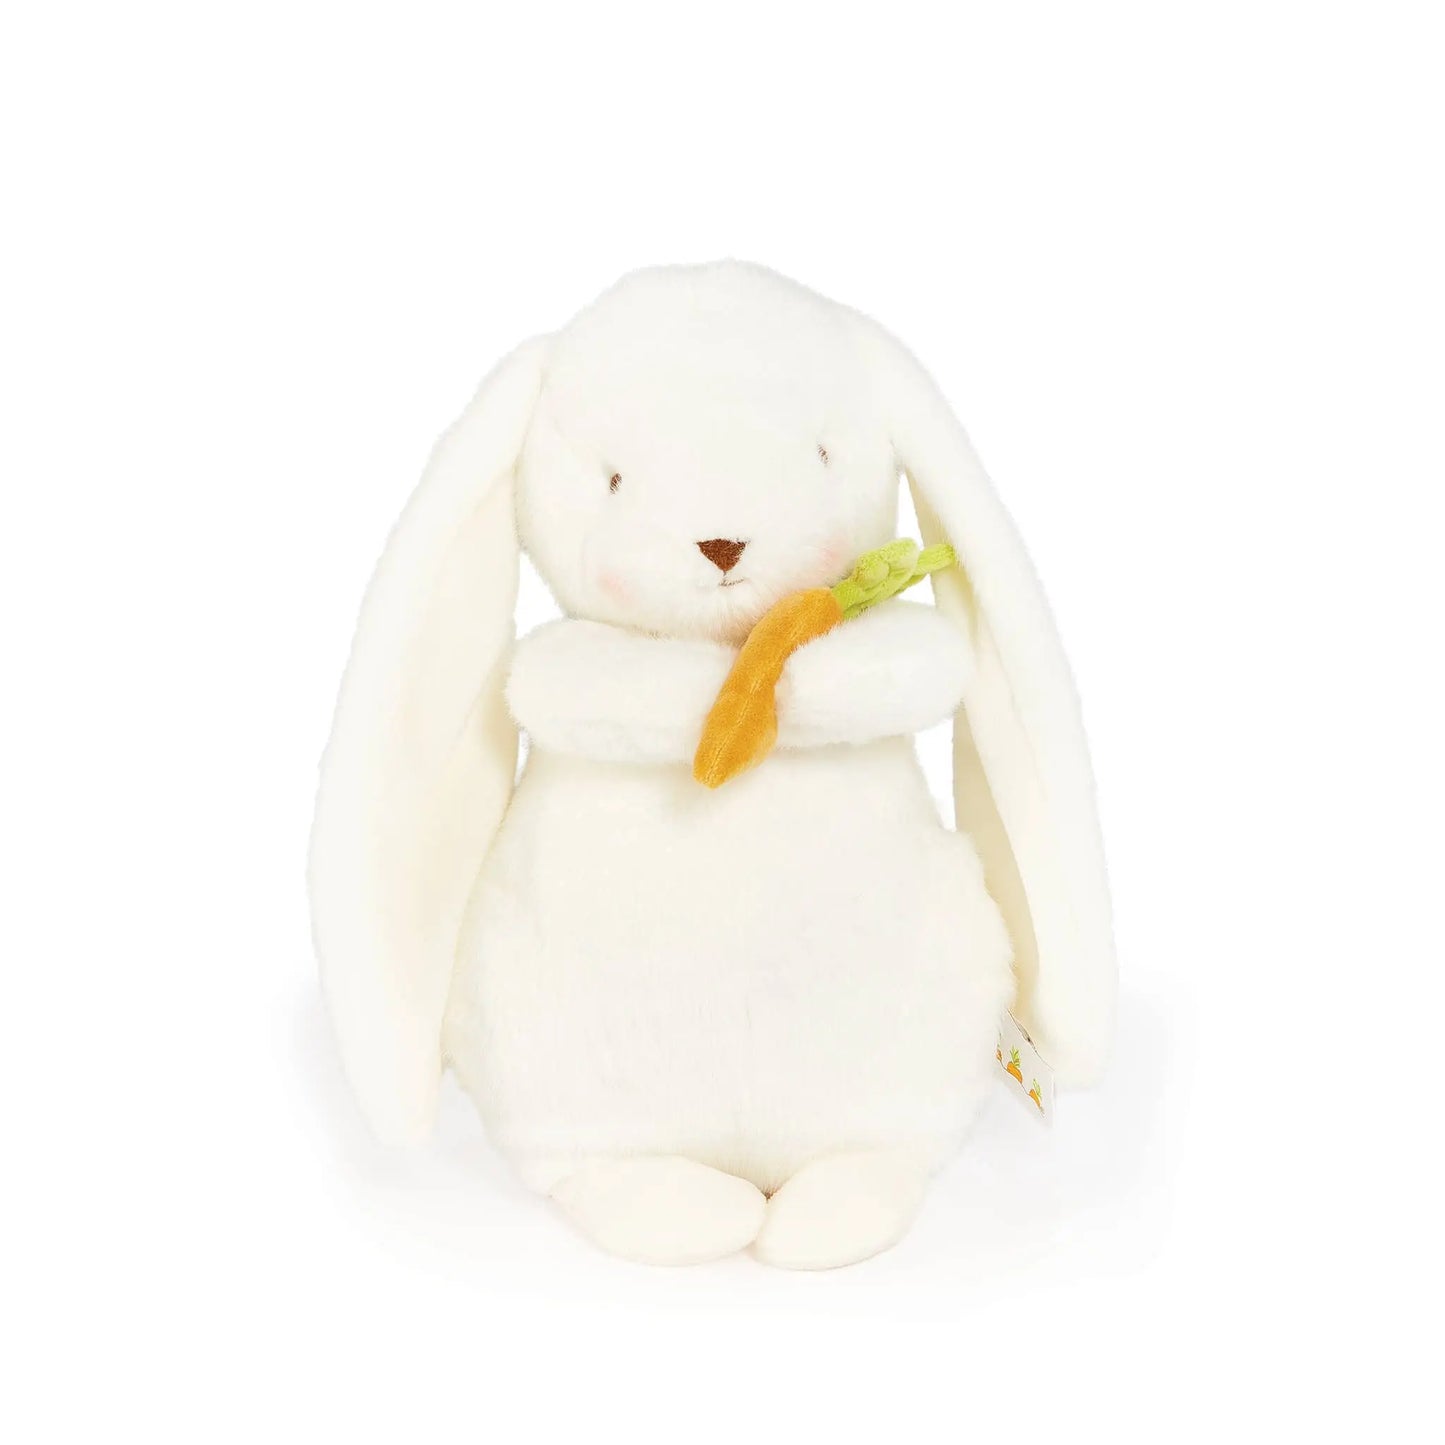 Year Of The Rabbit Plush (Limited Time Offer - Red Box) Bunnies By the Bay An Initial Impression